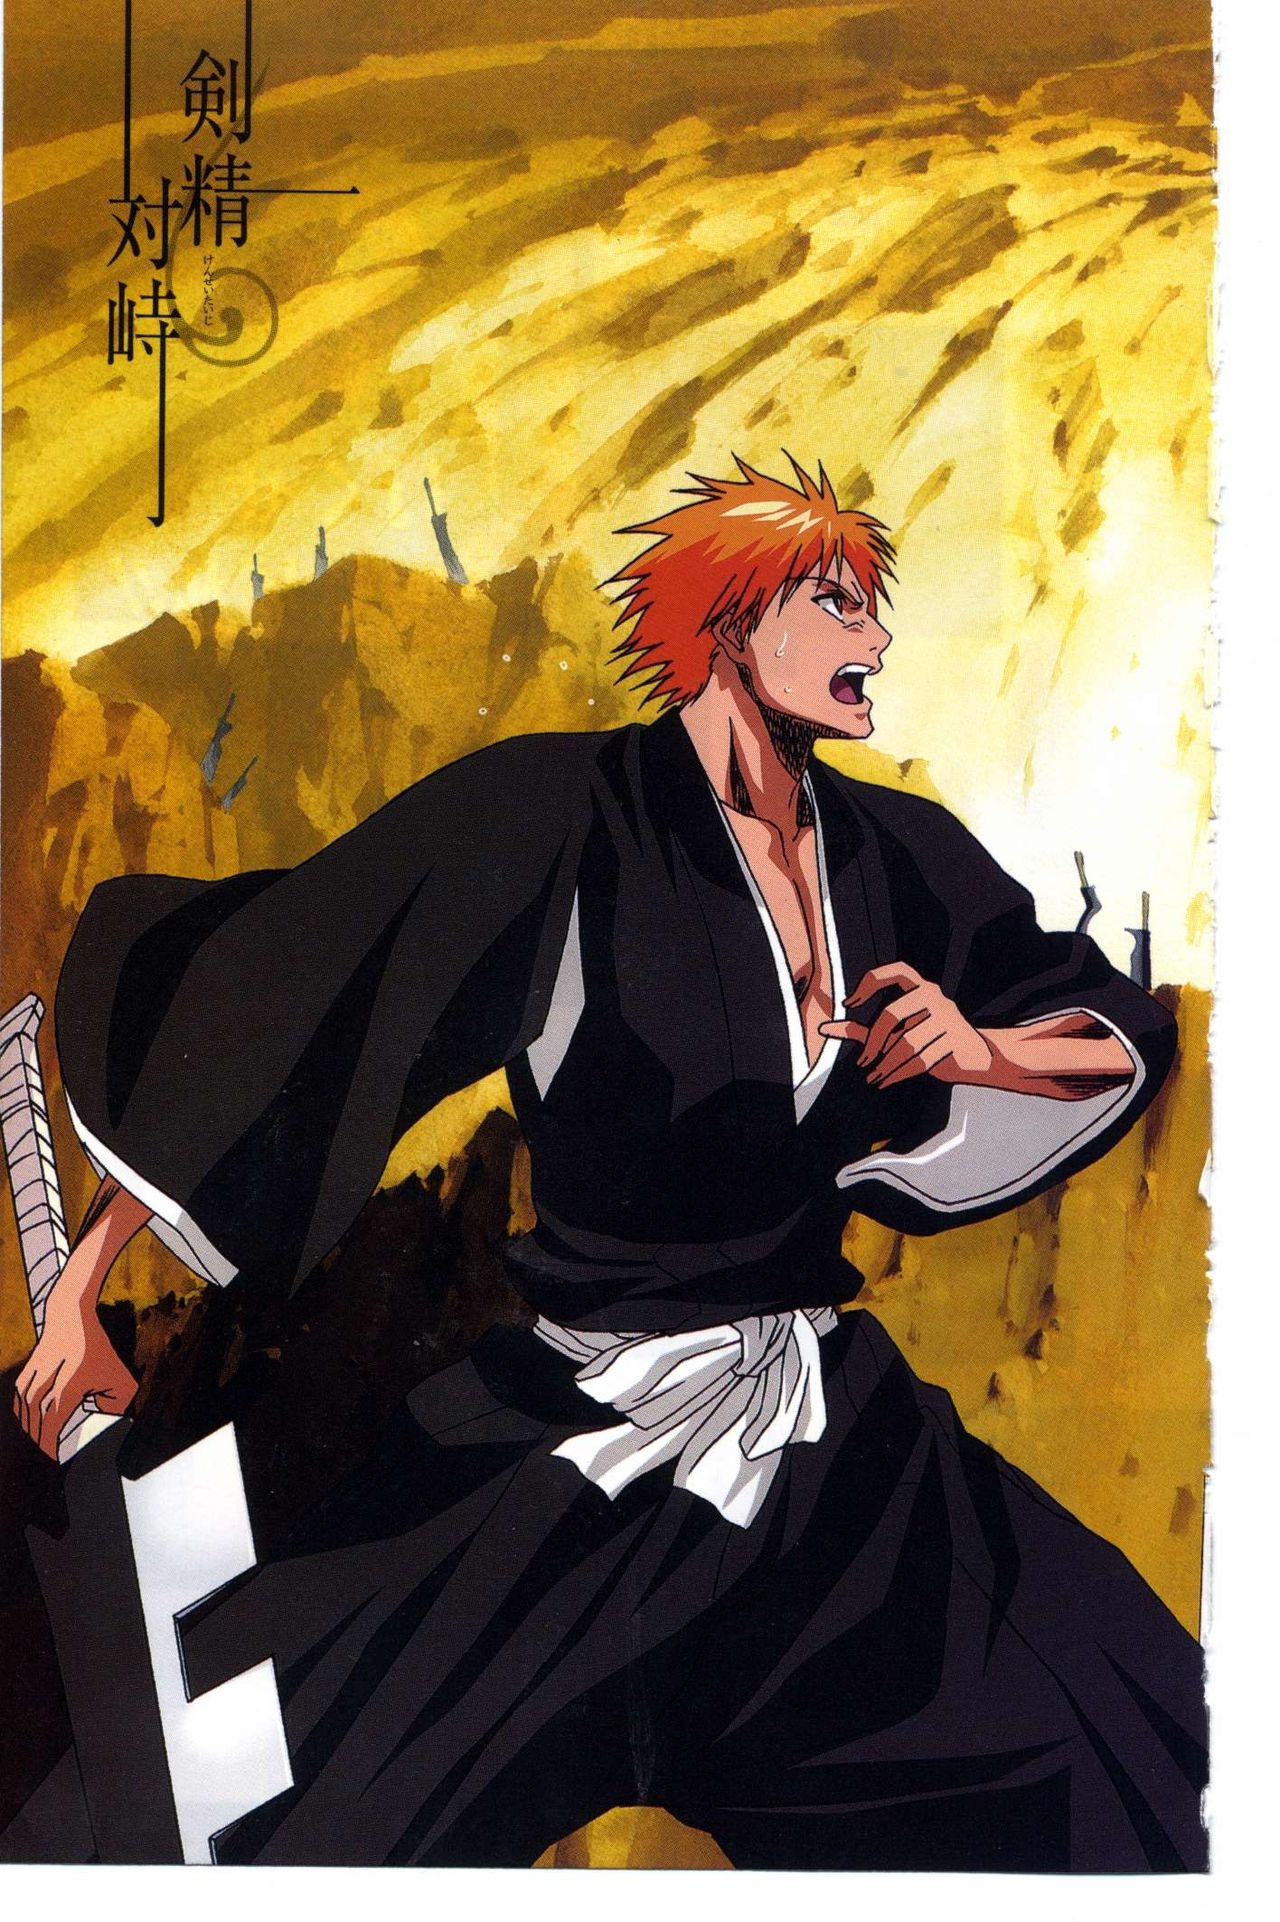 Bleach: Official Animation Book VIBEs 131